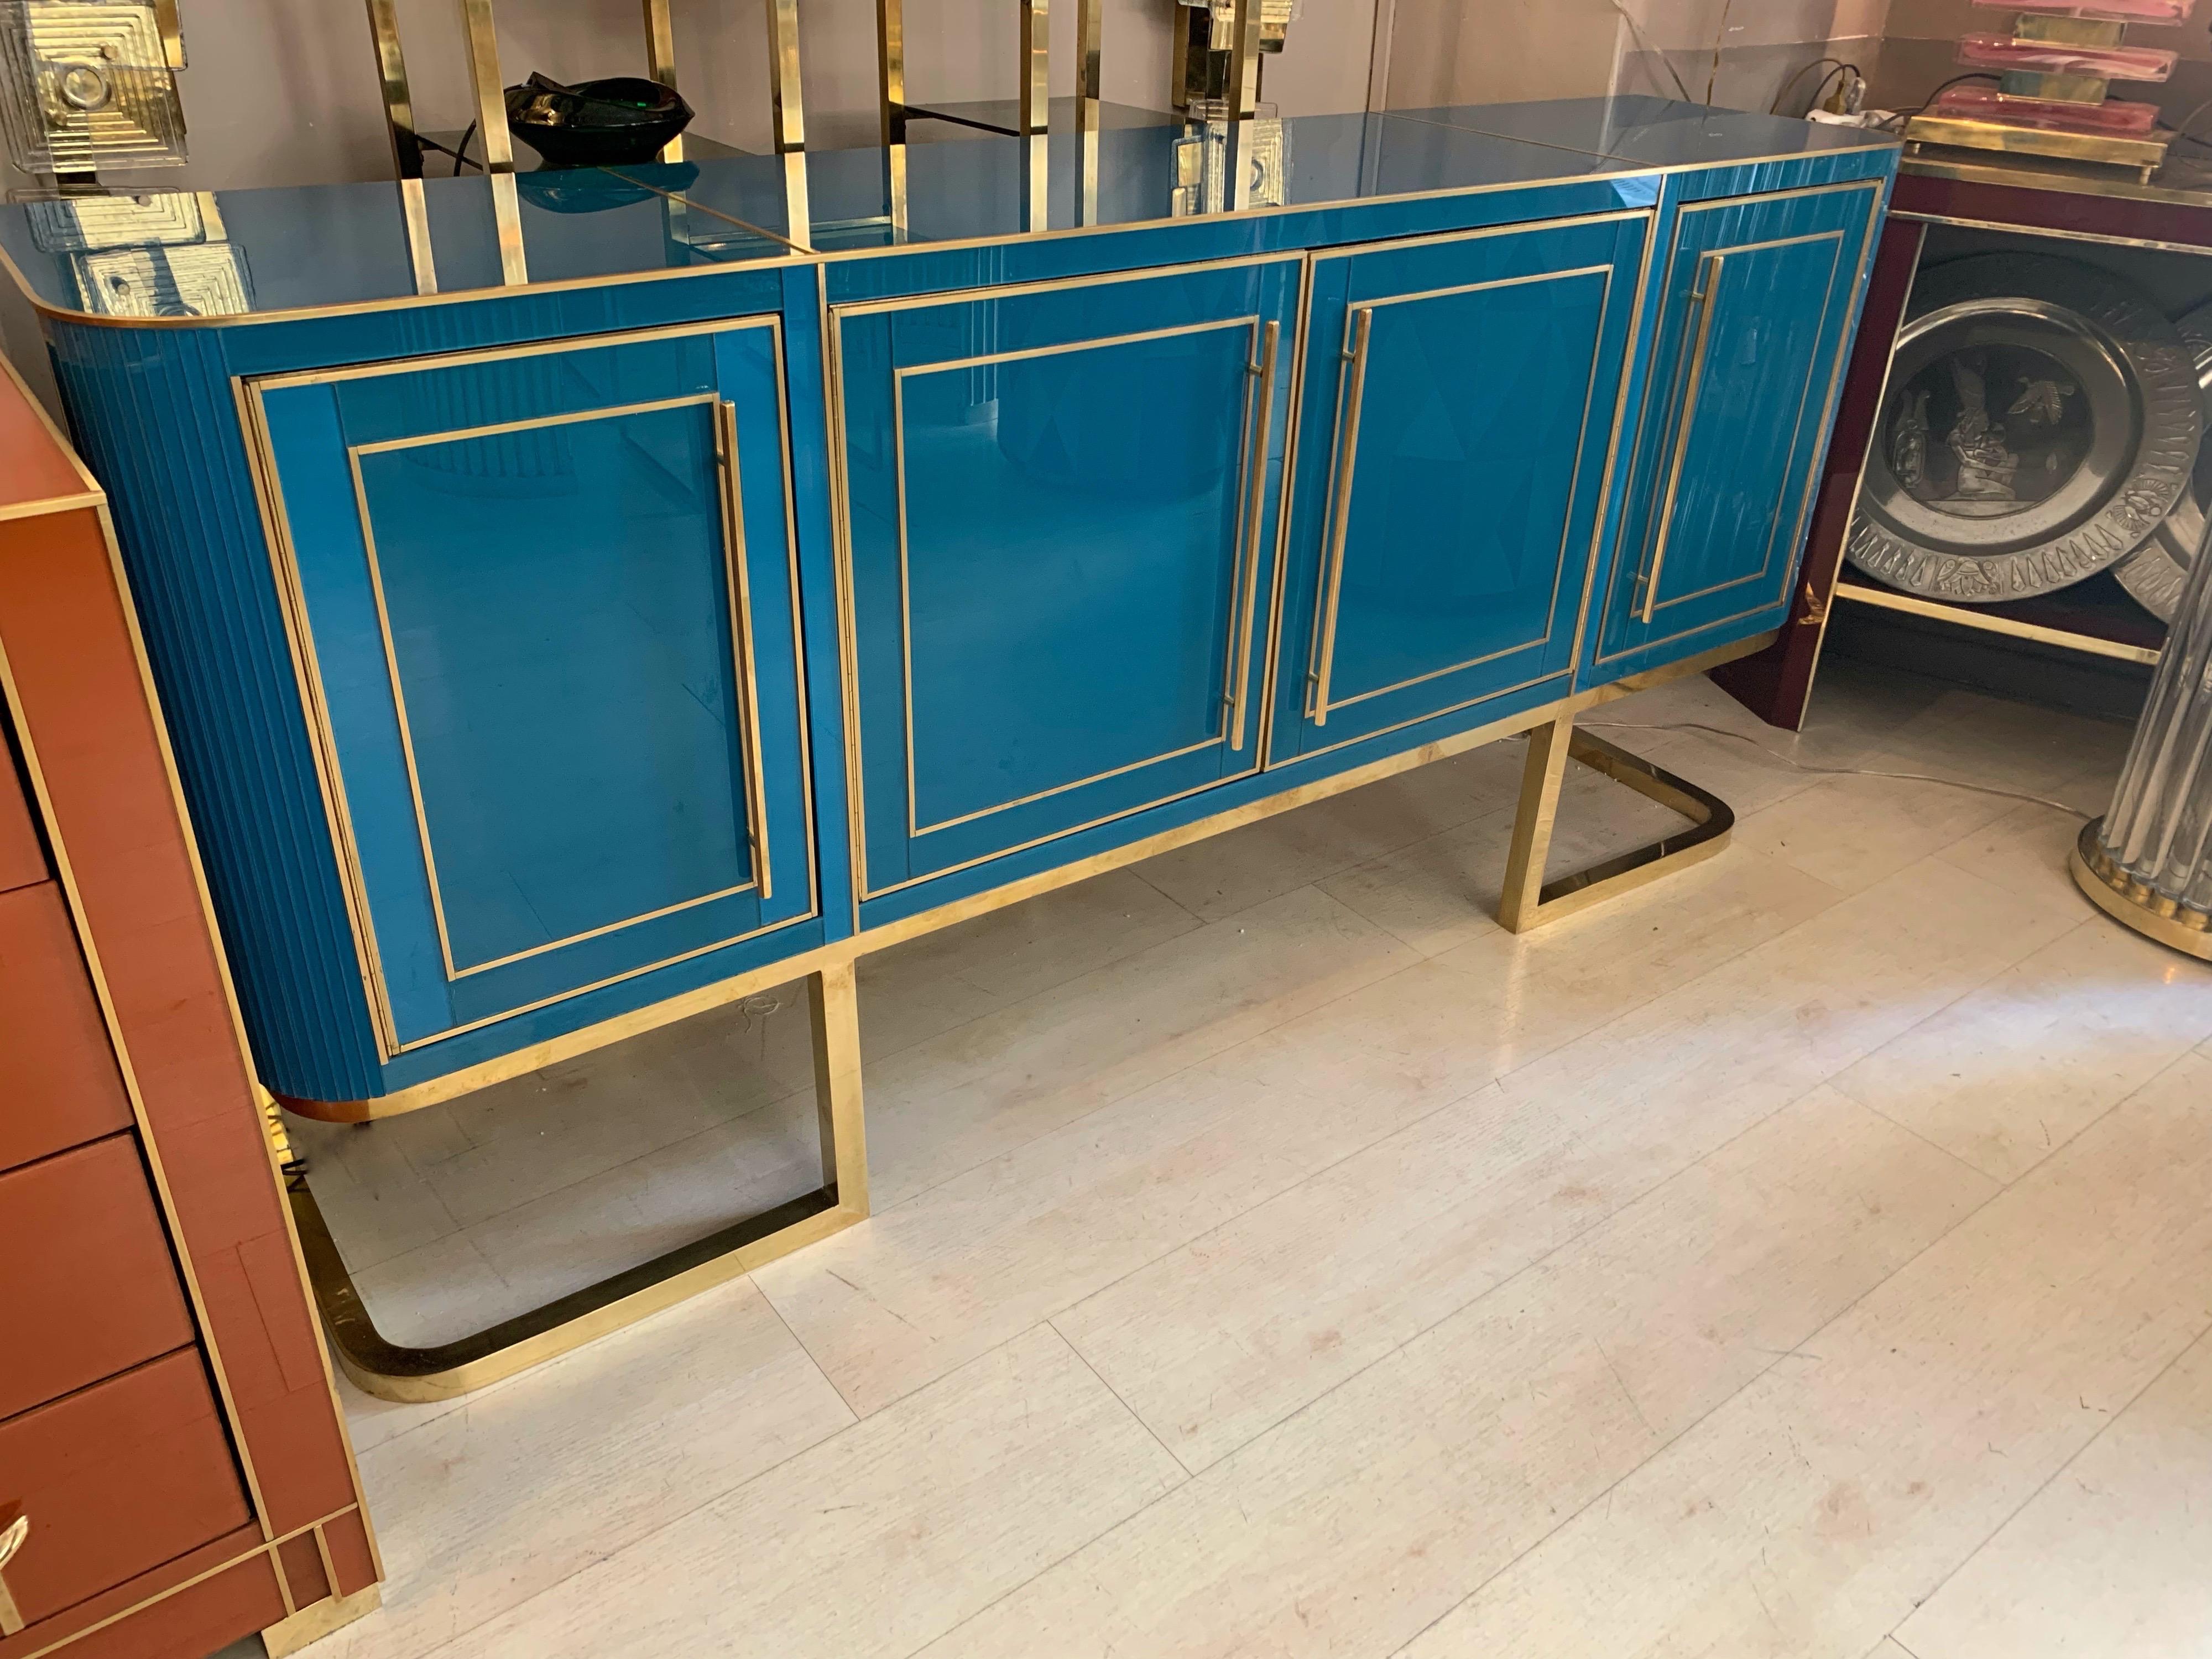 20th Century Italian Turquoise Opaline Glass Credenza, Brass Handles and Inlays, 1980